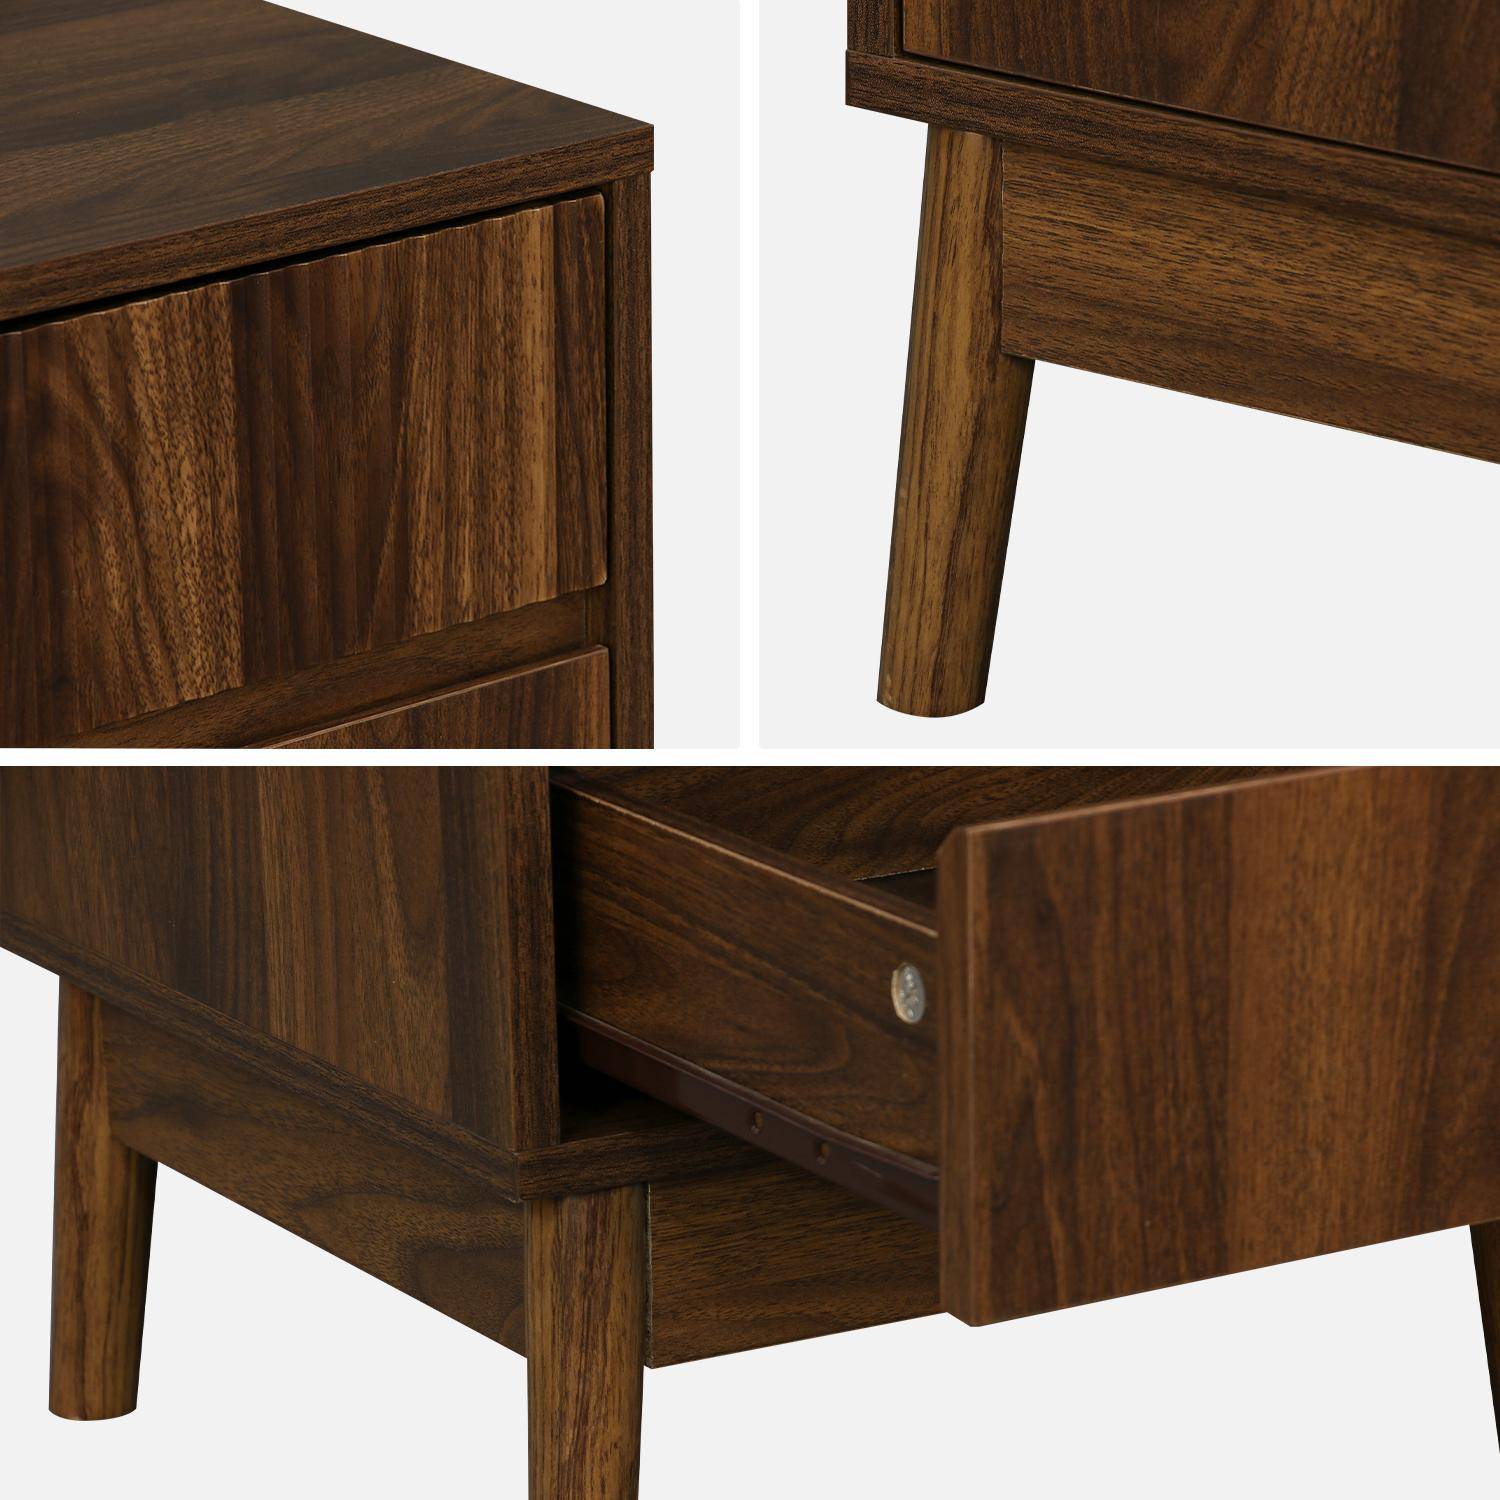 Pair of grooved wooden bedside tables with 2 drawers, 40x39x48cm - Linear - Dark Wood colour Photo7